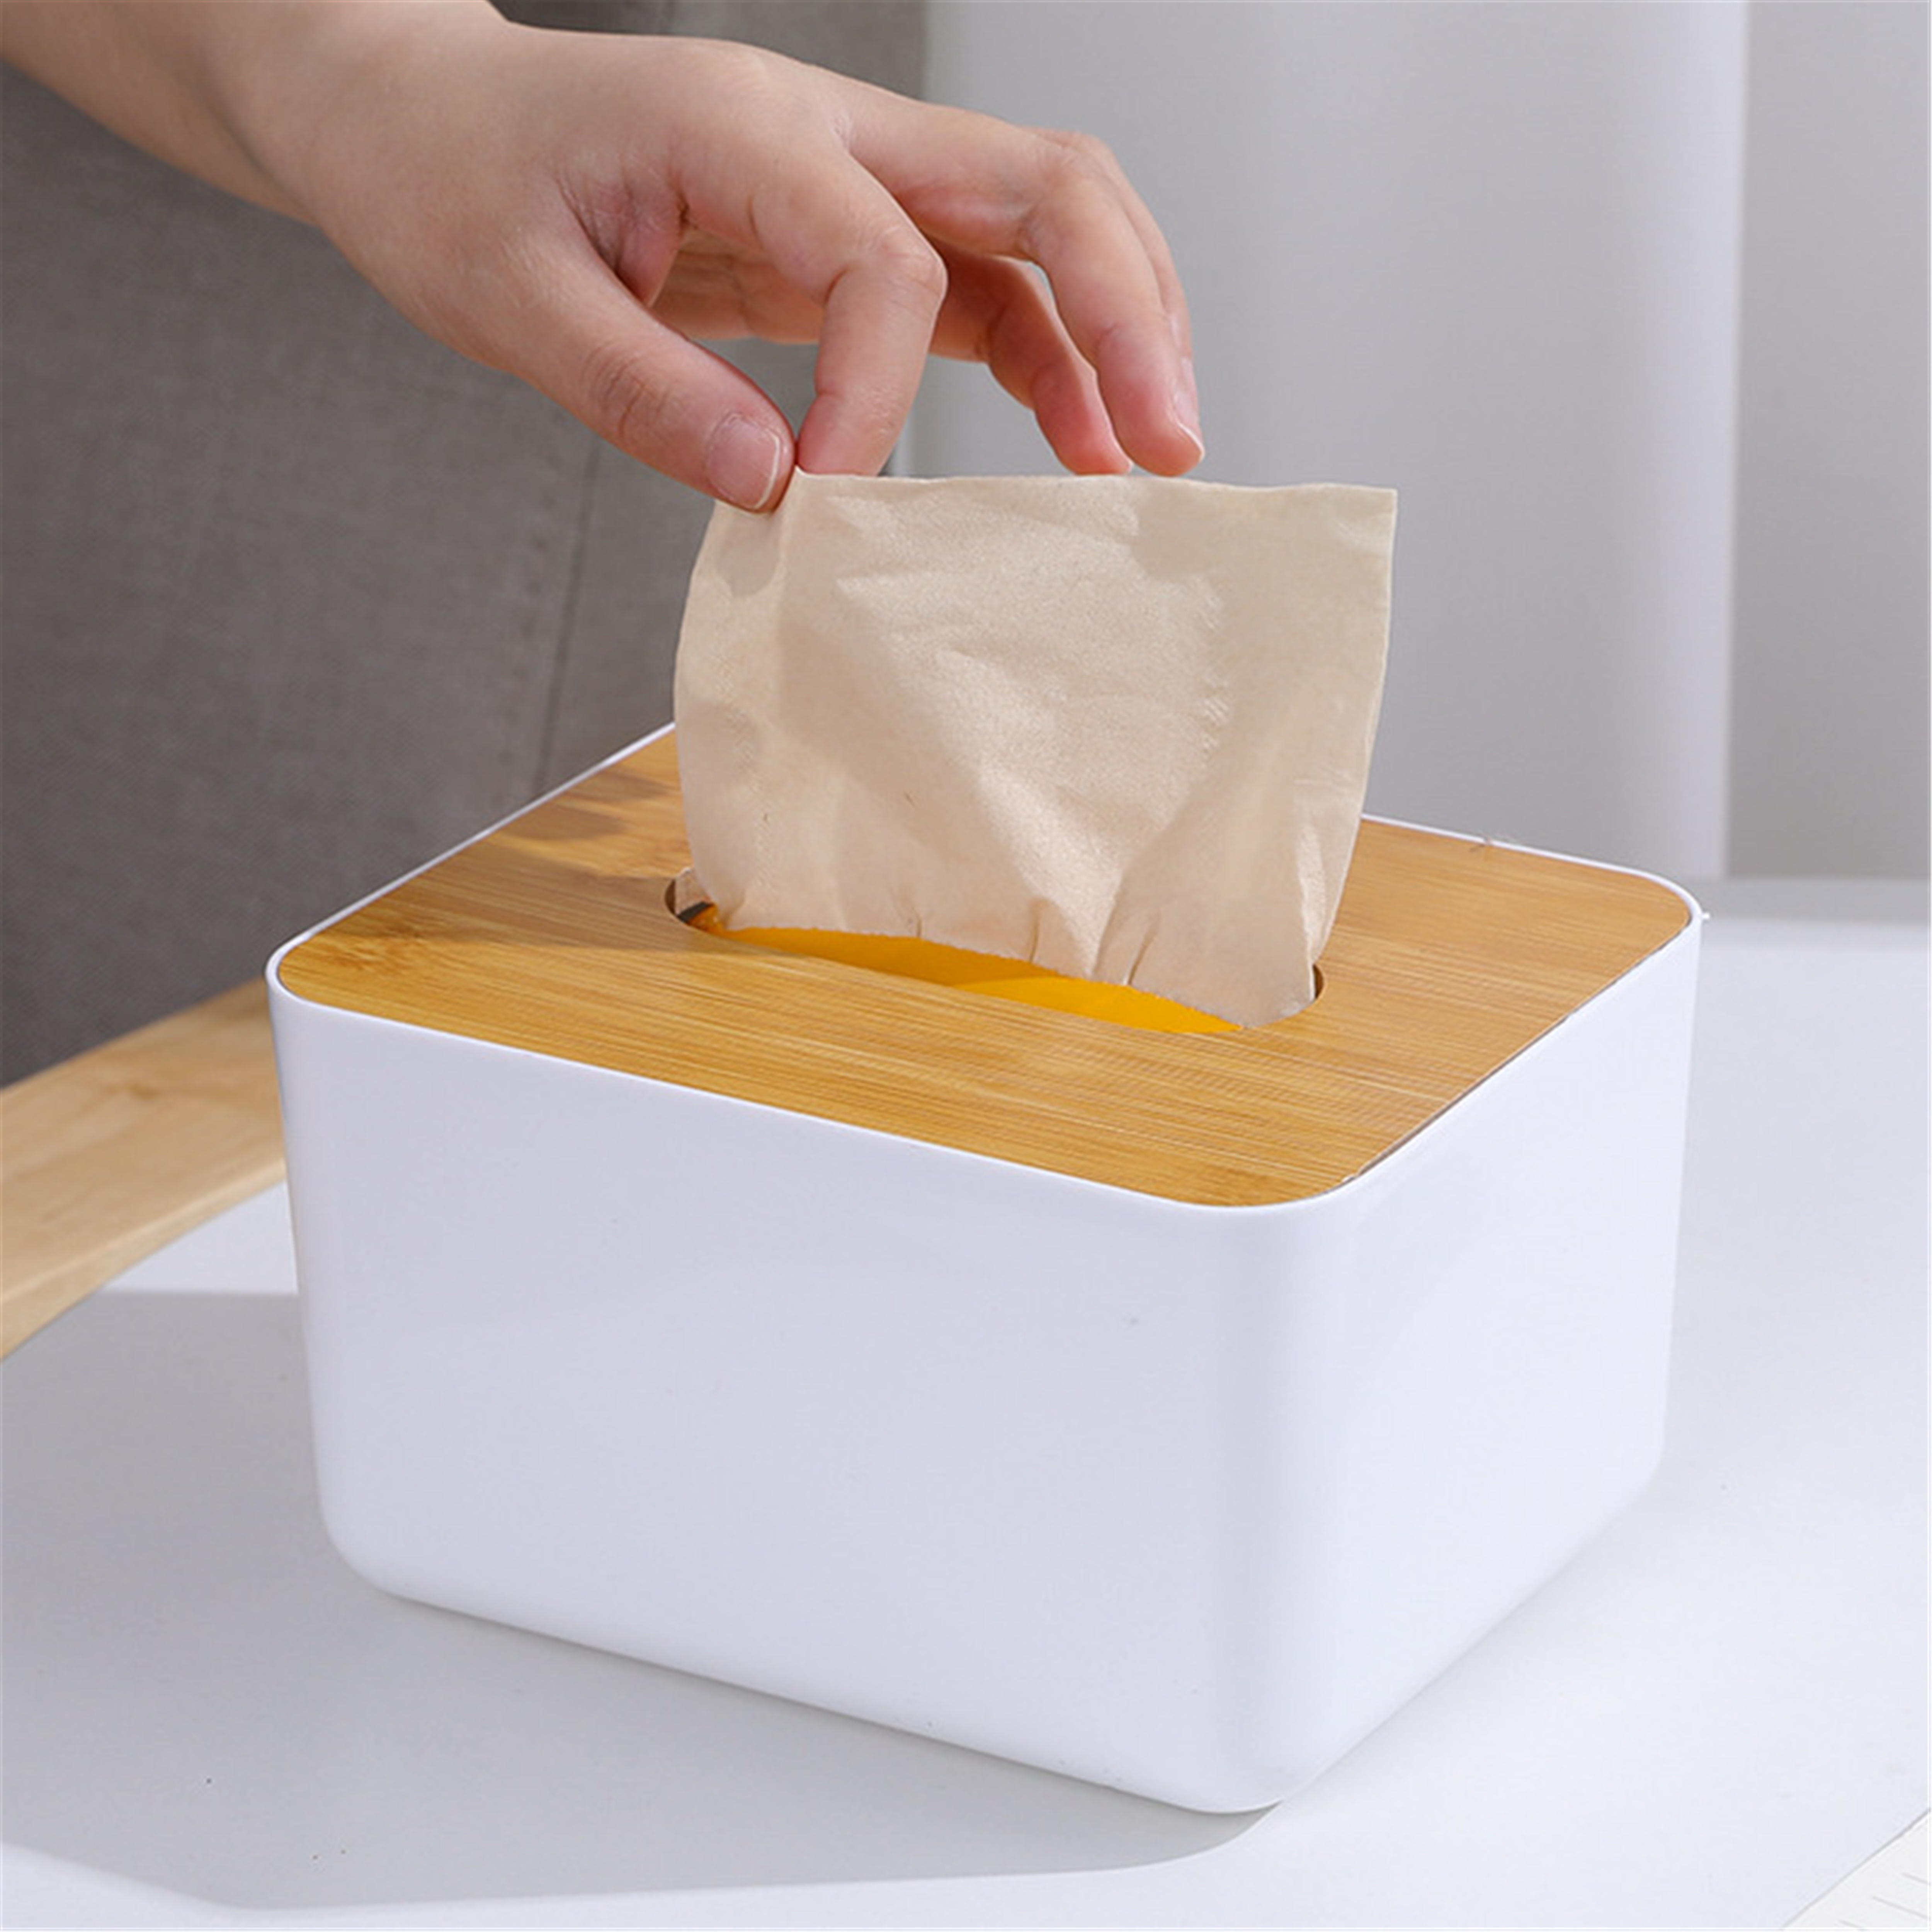  Multi functional paper towel box with bamboo and wood cover